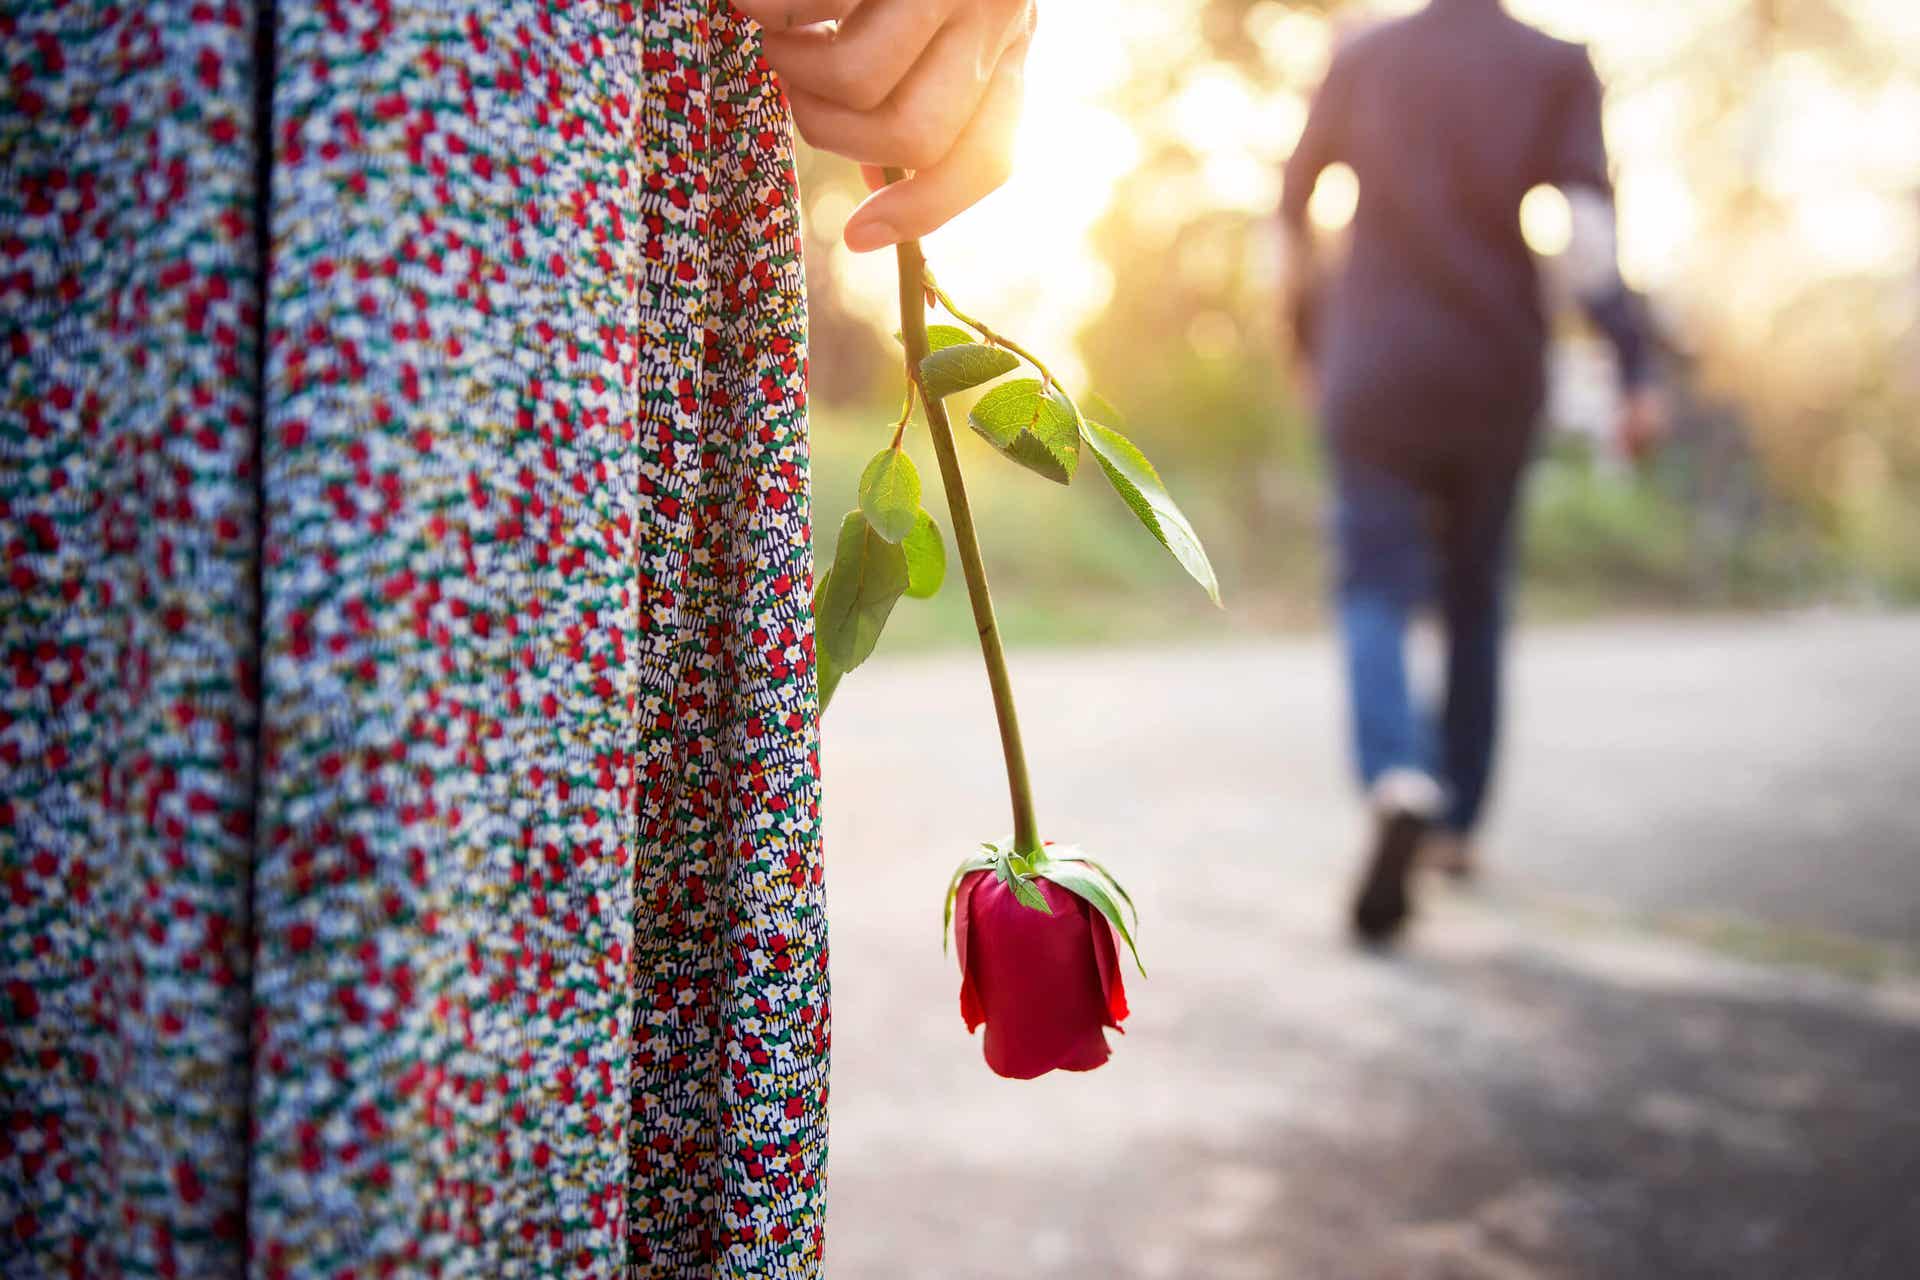 A man walking away from a woman holding a rose down by her side.